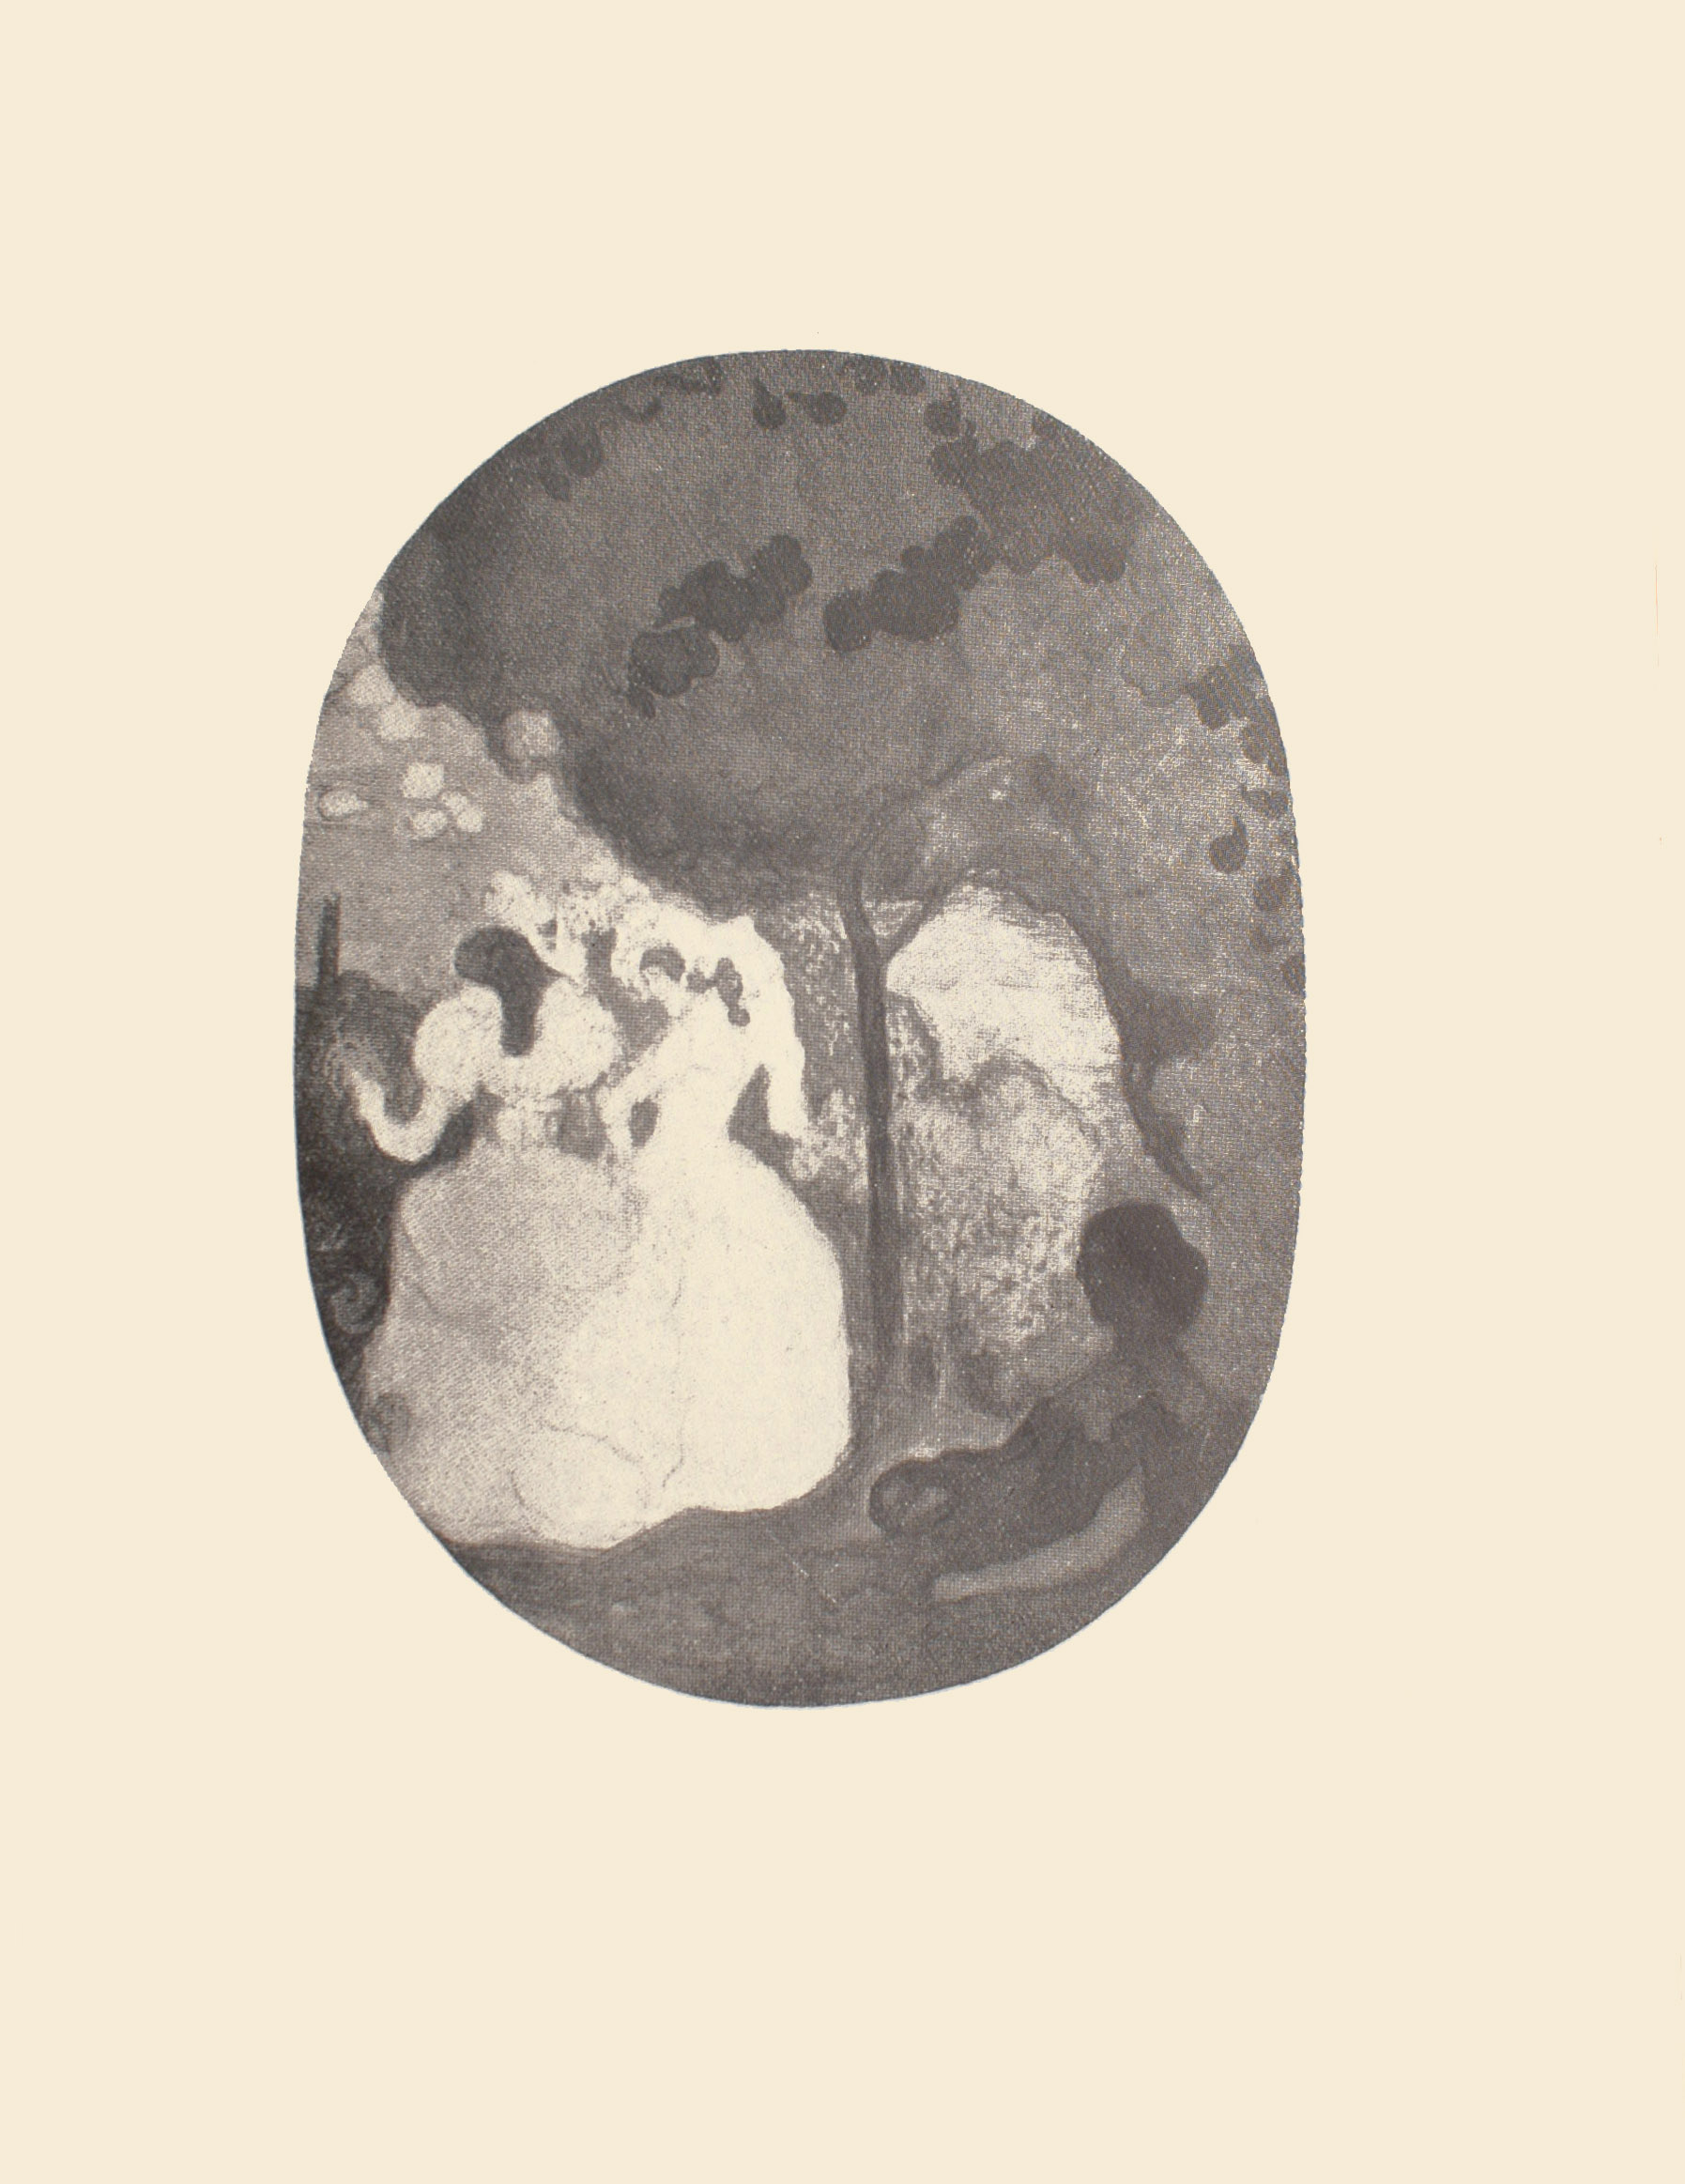 Image is of two women walking One woman has lighter coloured hair one woman has dark hair Both are wearing light coloured dresses with long sleeves and light coloured hats There is a large tree behind them and a hill in front of them In the bottom right corner there is a darkened female figure She is shown in profile though her facial features are undistinguishable The sky is cloudy The image is oval shaped and displayed vertically